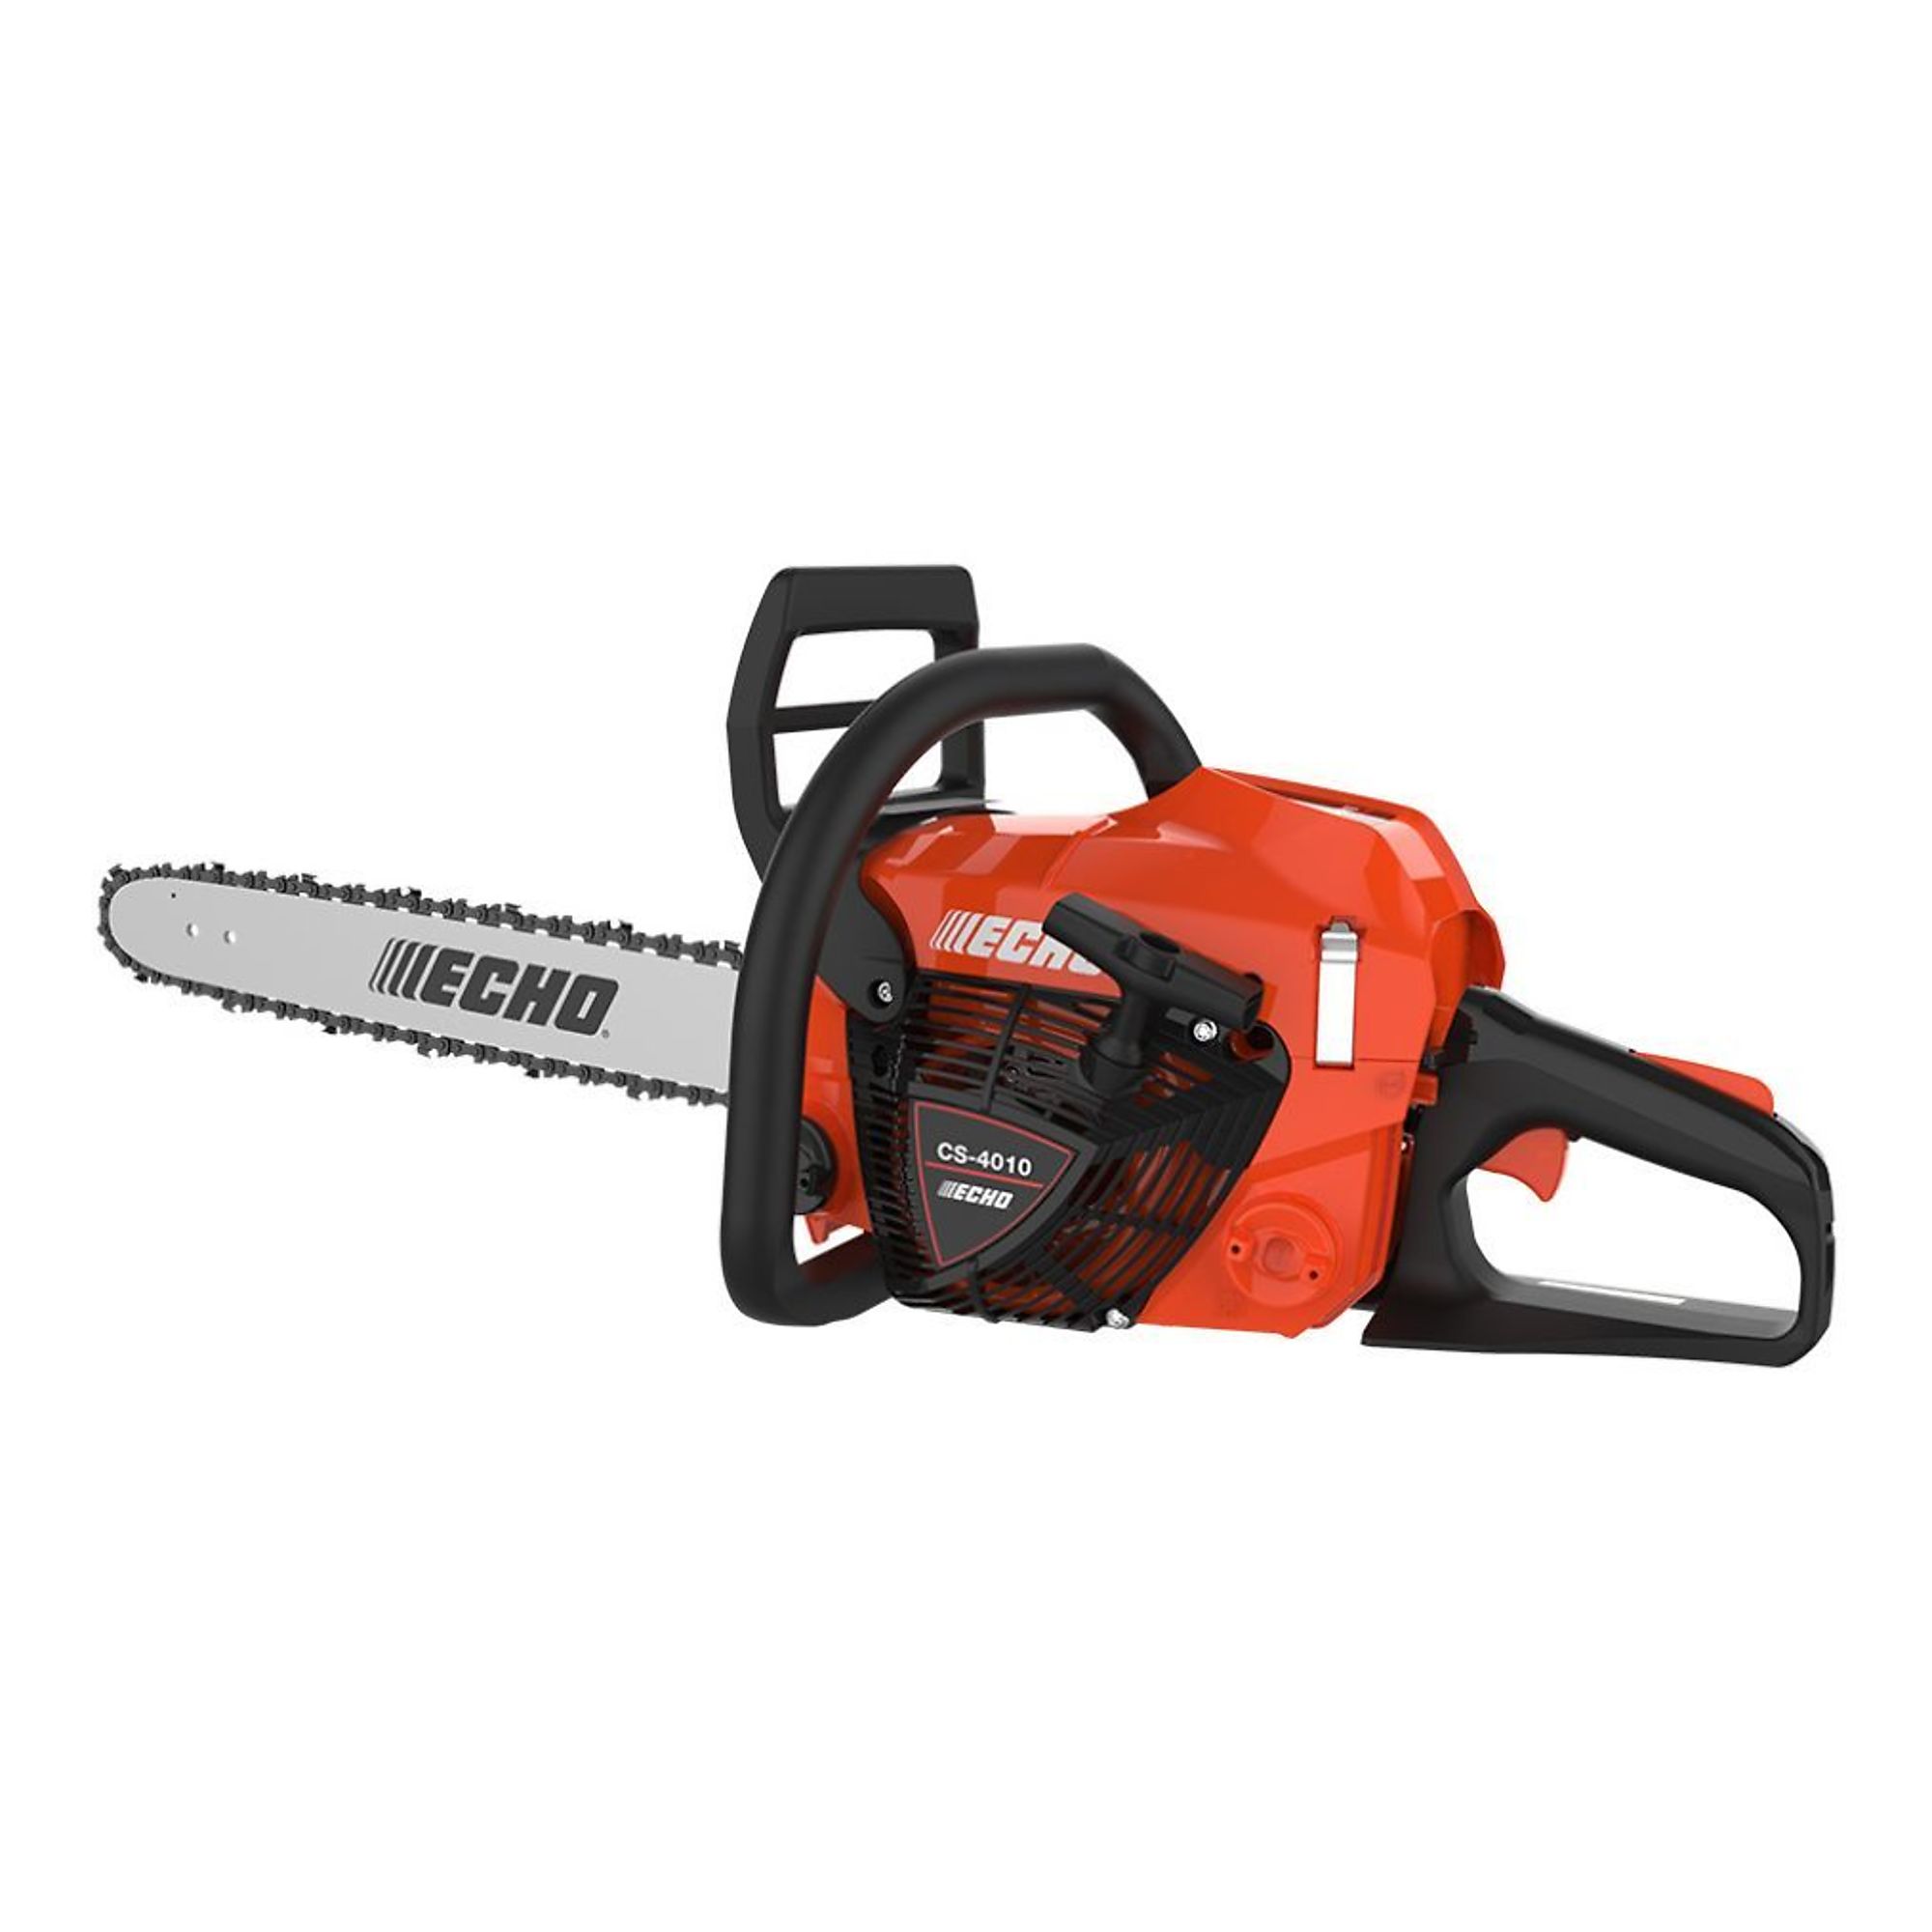 ECHO, Gas-Powered Rear Handle Chainsaw, Bar Length 18 in, Engine Displacement 41.6 cc, Model CS-4010-18